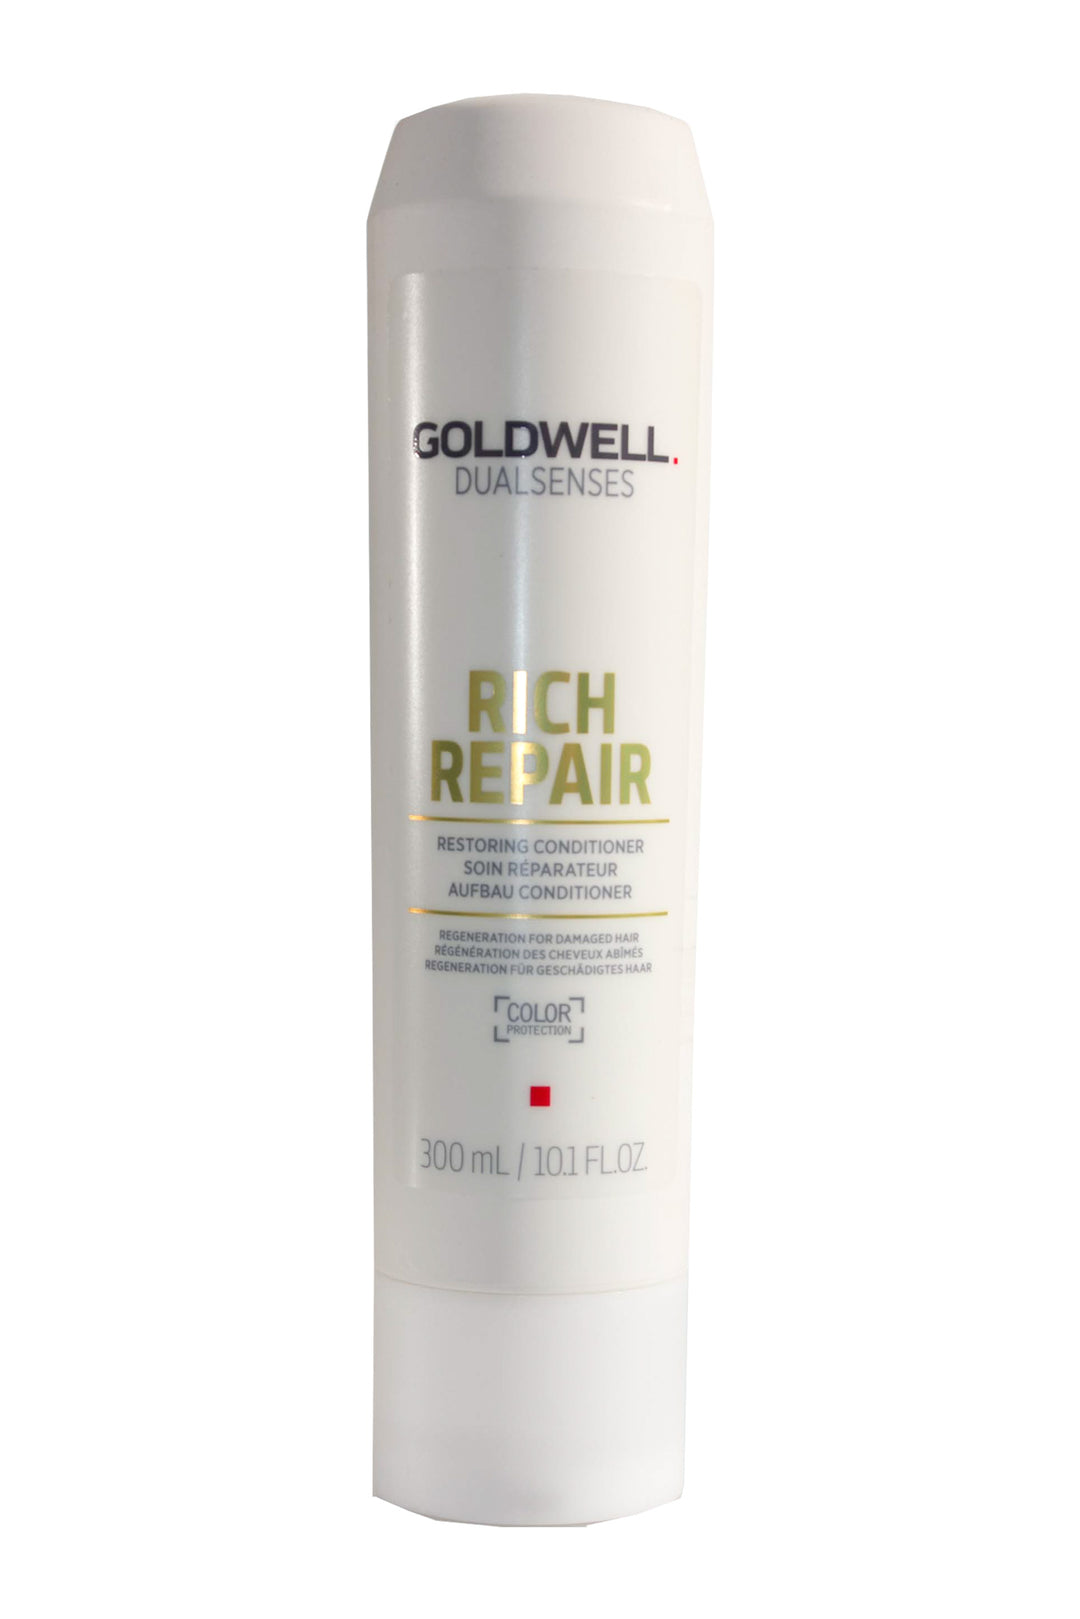 goldwell-rich-repair-conditioner